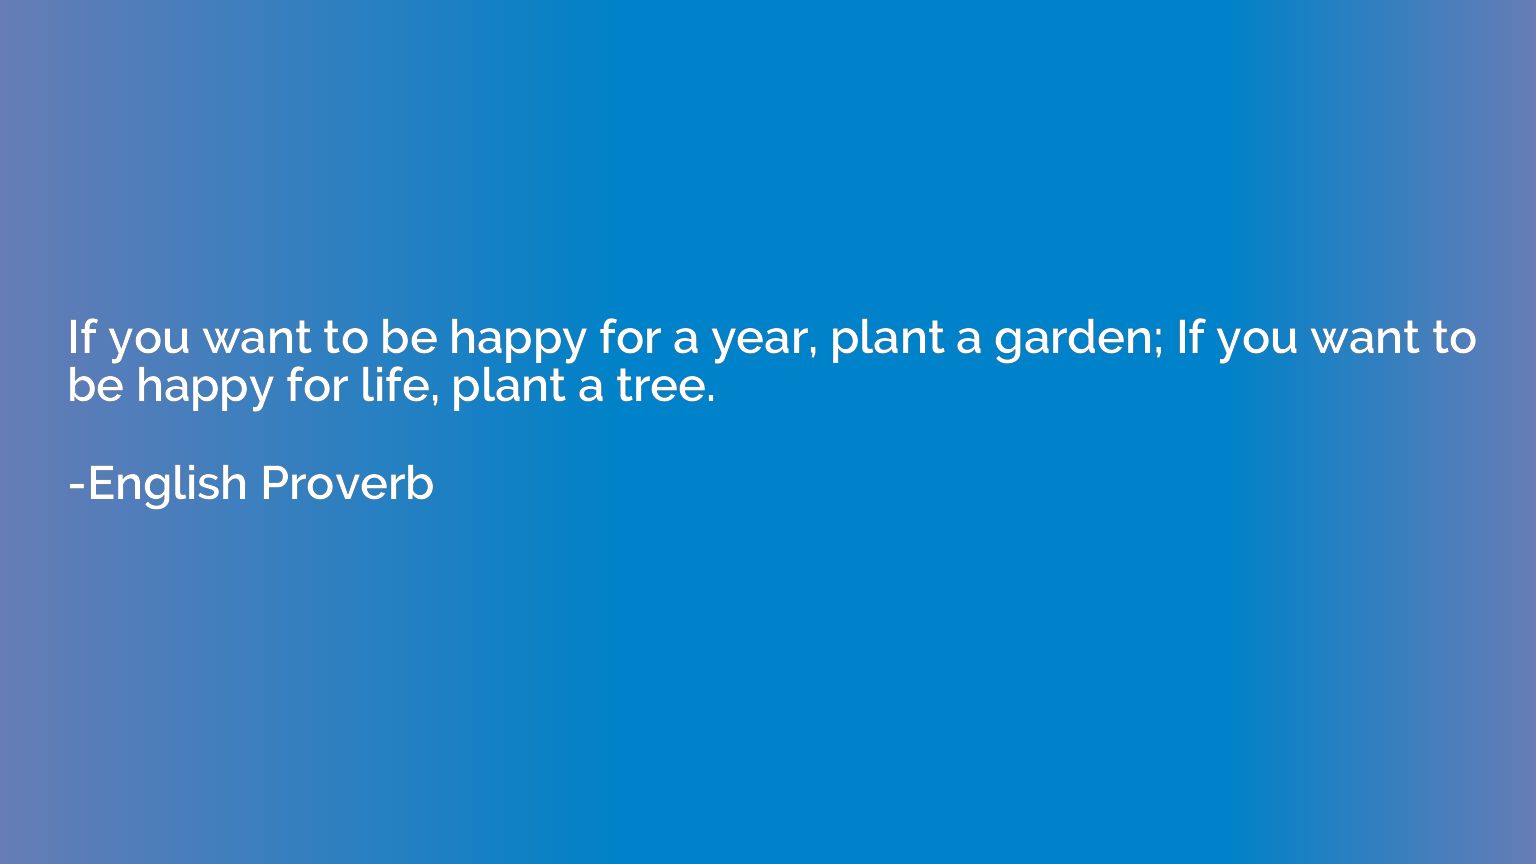 If you want to be happy for a year, plant a garden; If you w